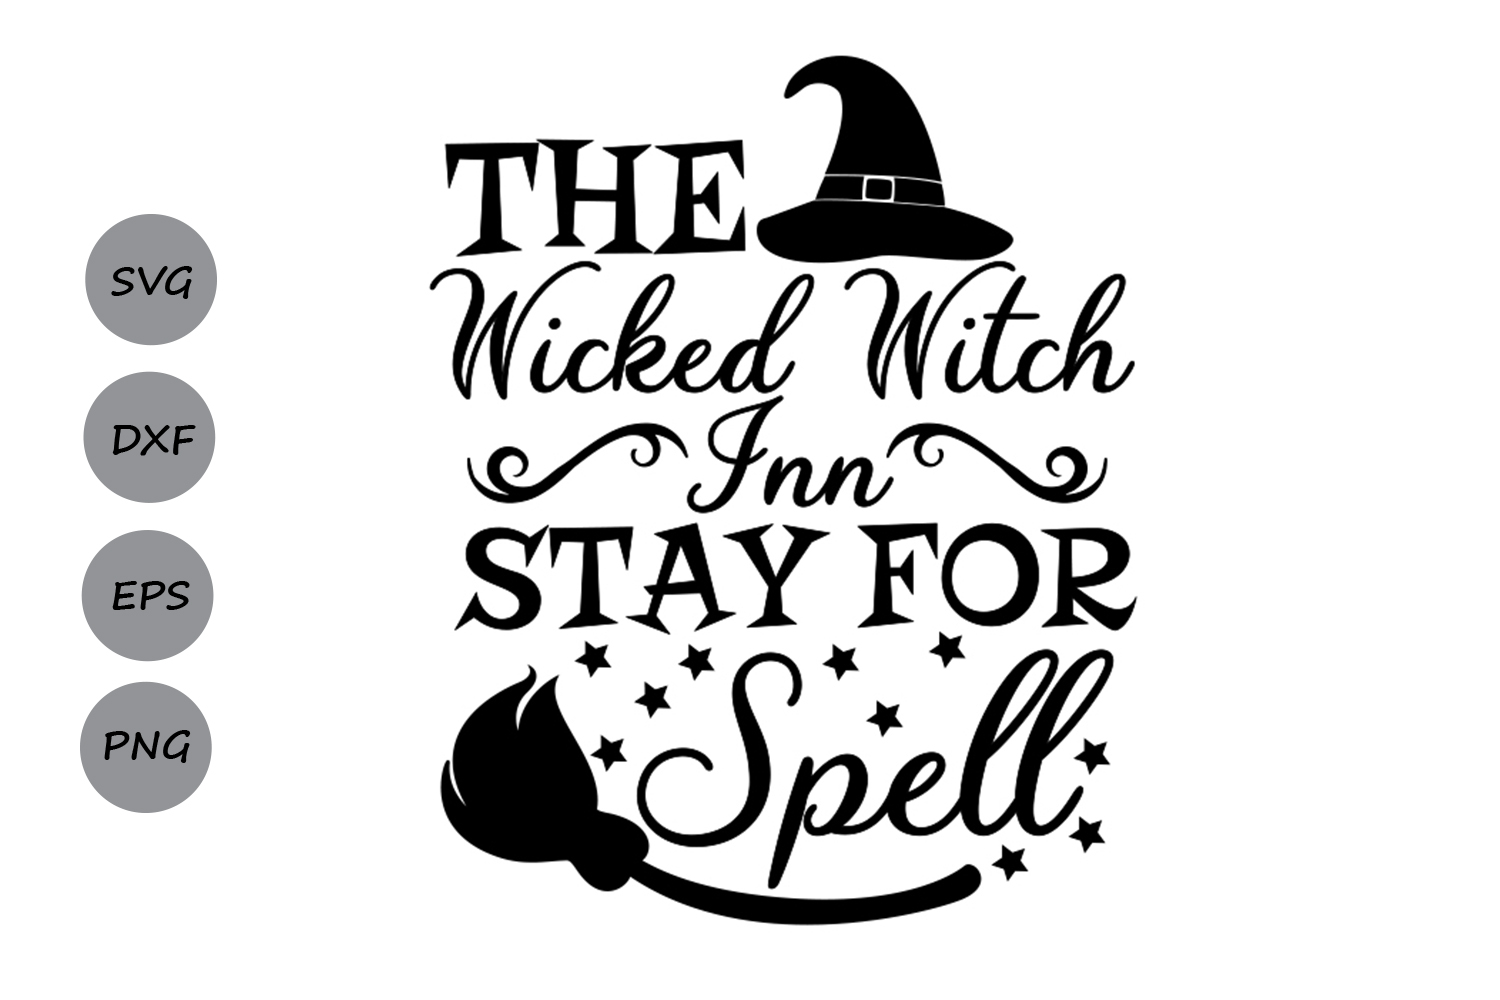 Download Wicked Witch Inn svg, Halloween svg, witch svg, spooky svg.